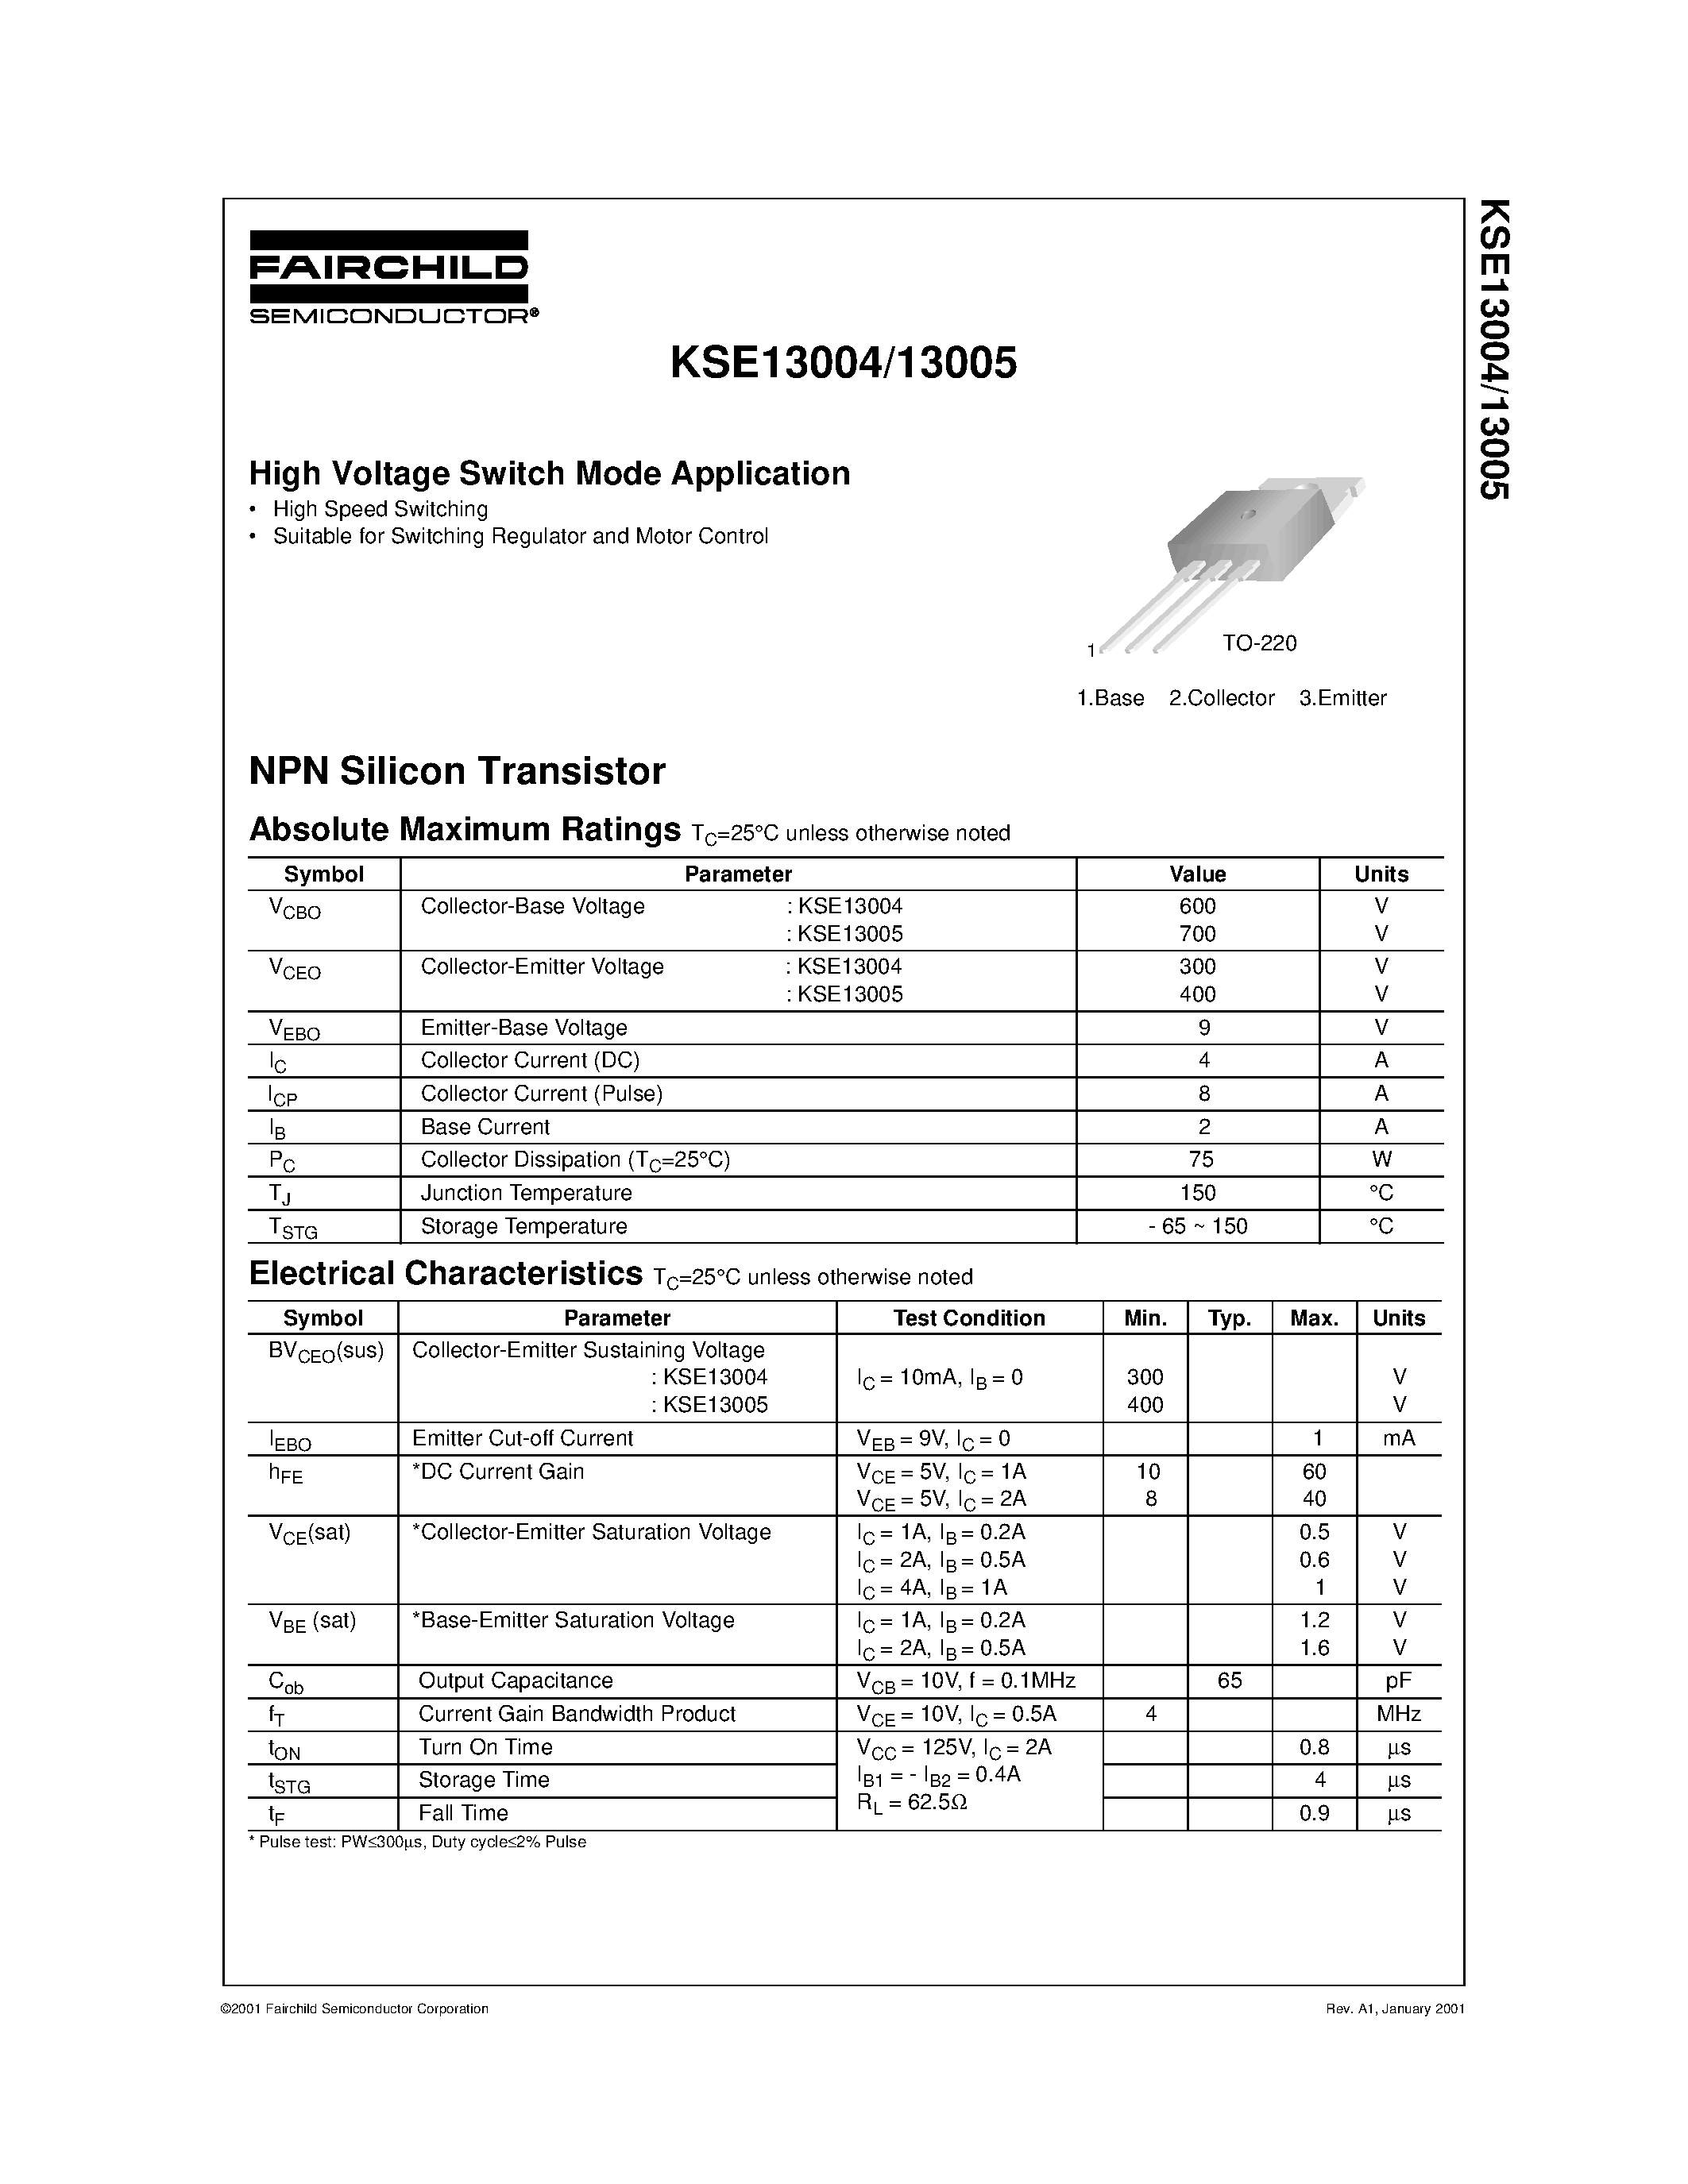 Datasheet KSE13005 - High Voltage Switch Mode Application page 1